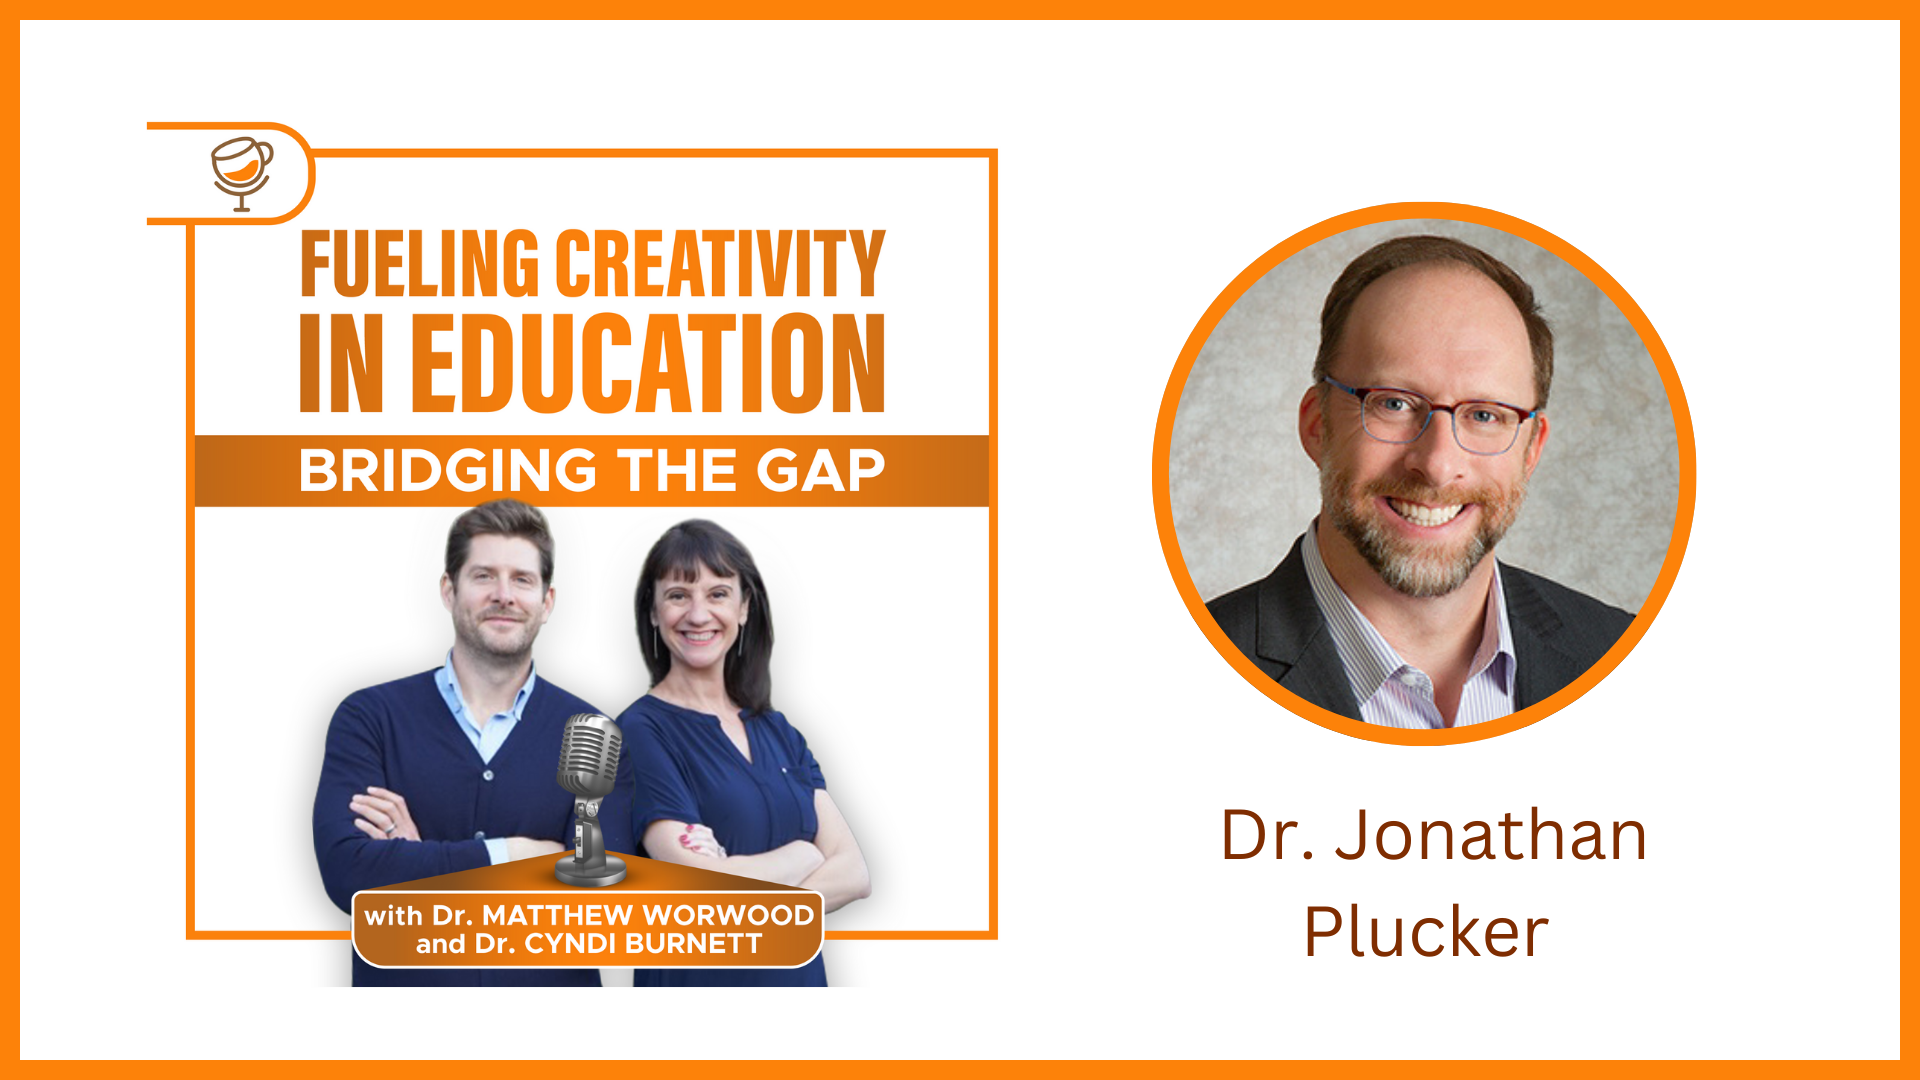 Discussing Excellence Gaps and Creativity with Dr. Jonathan Plucker - Part 1